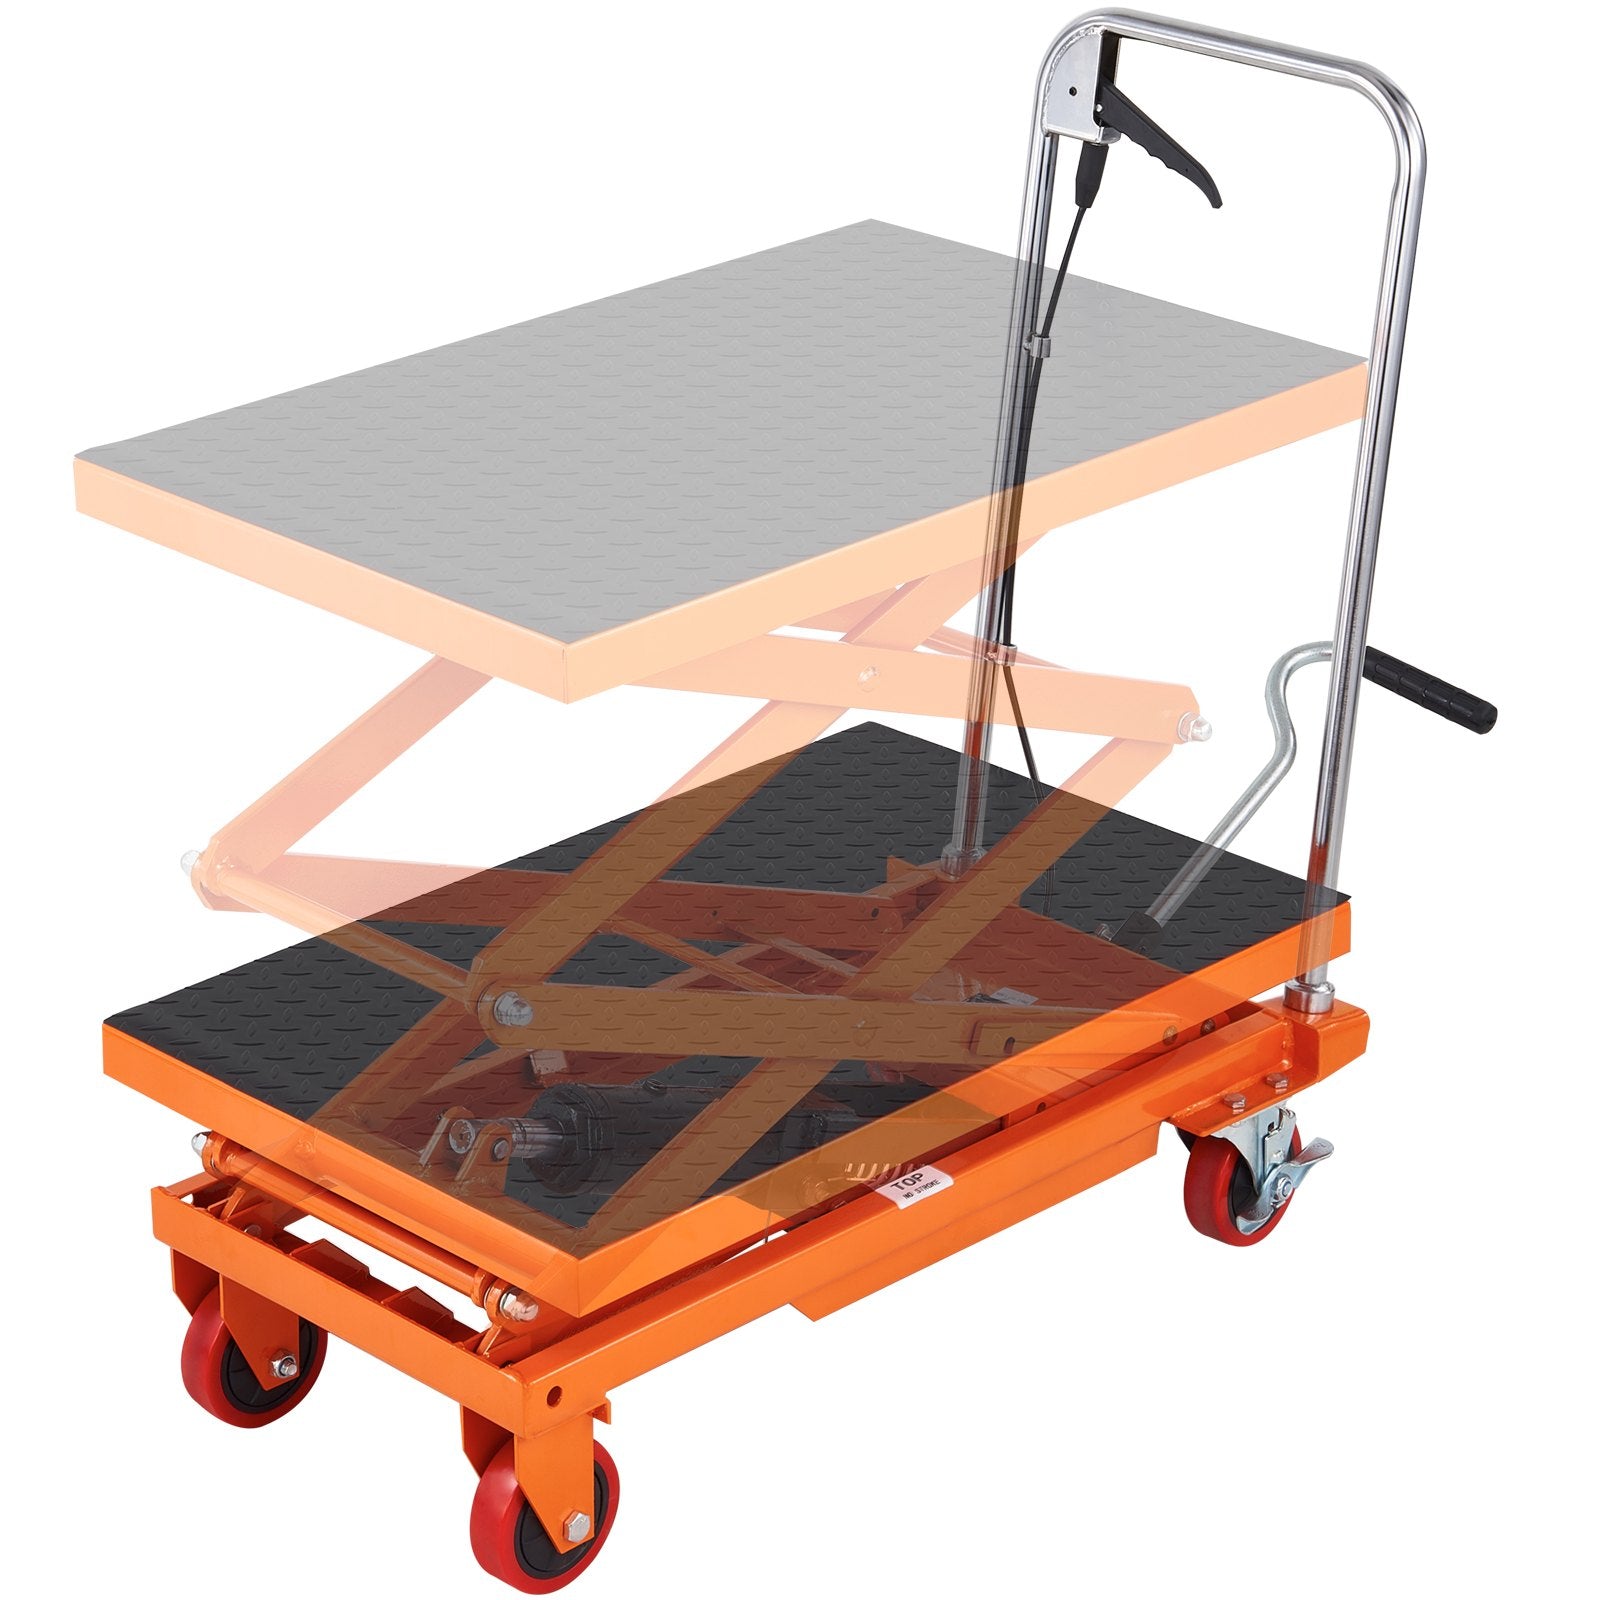 VEVOR Hydraulic Lift Table Cart, 330lbs Capacity 50" Lifting Height, Manual Double Scissor Lift Table with 4 Wheels and Non-slip Pad